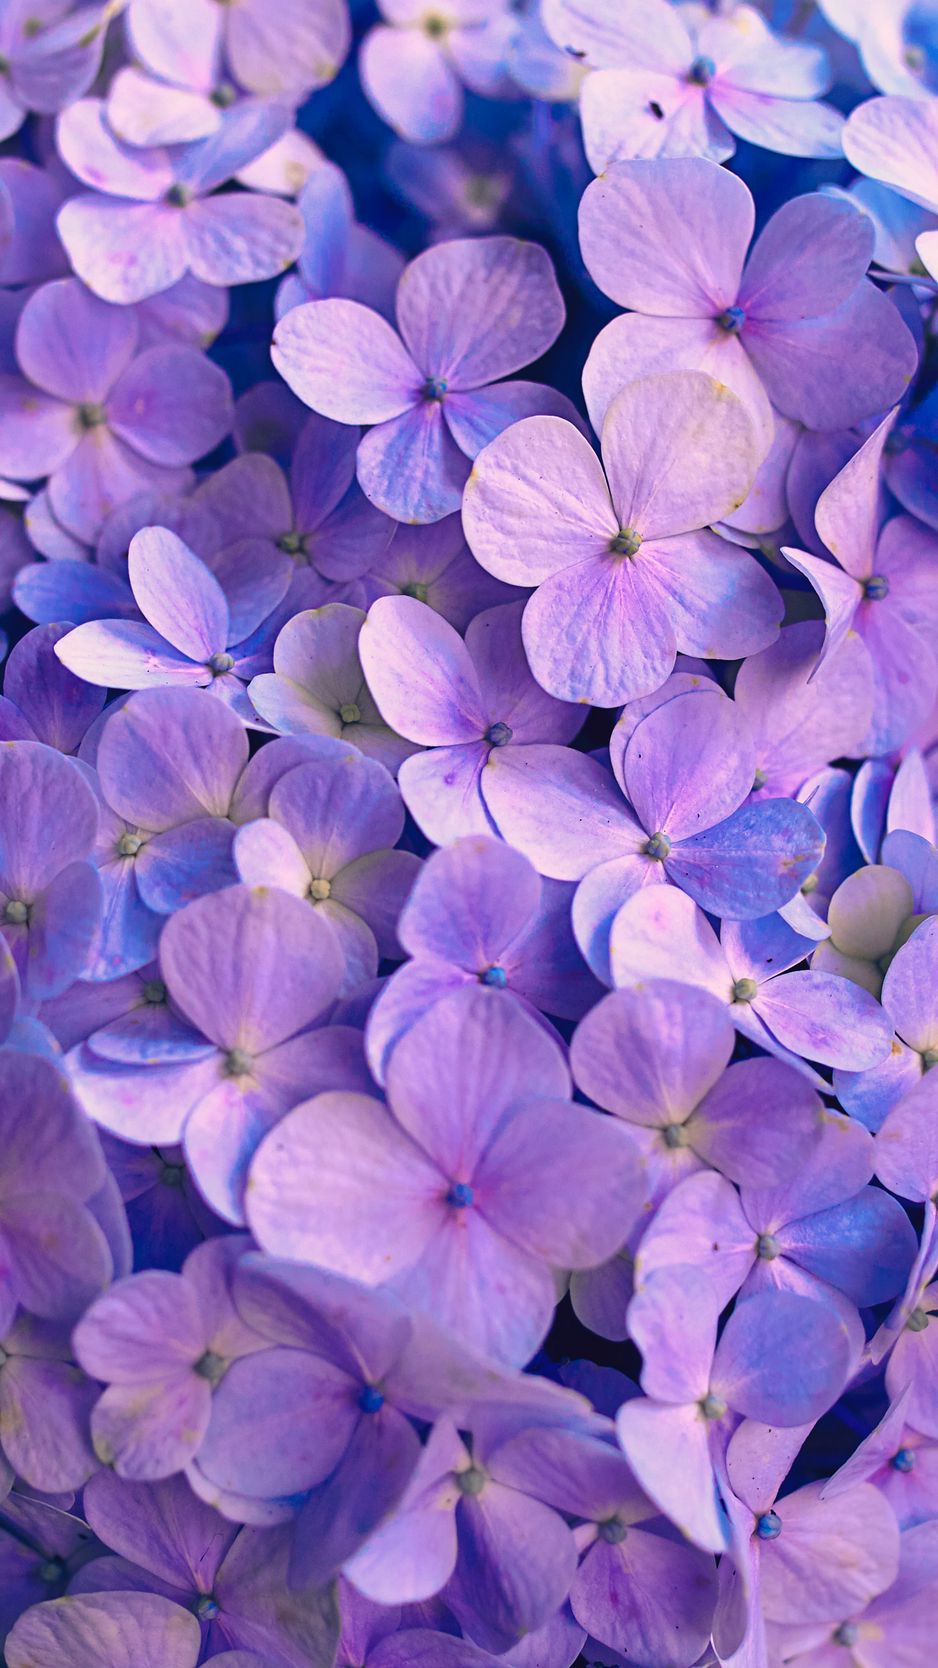 Download wallpaper 938x1668 hydrangea, flowers, petals, purple iphone 8/7/6s/6  for parallax hd background